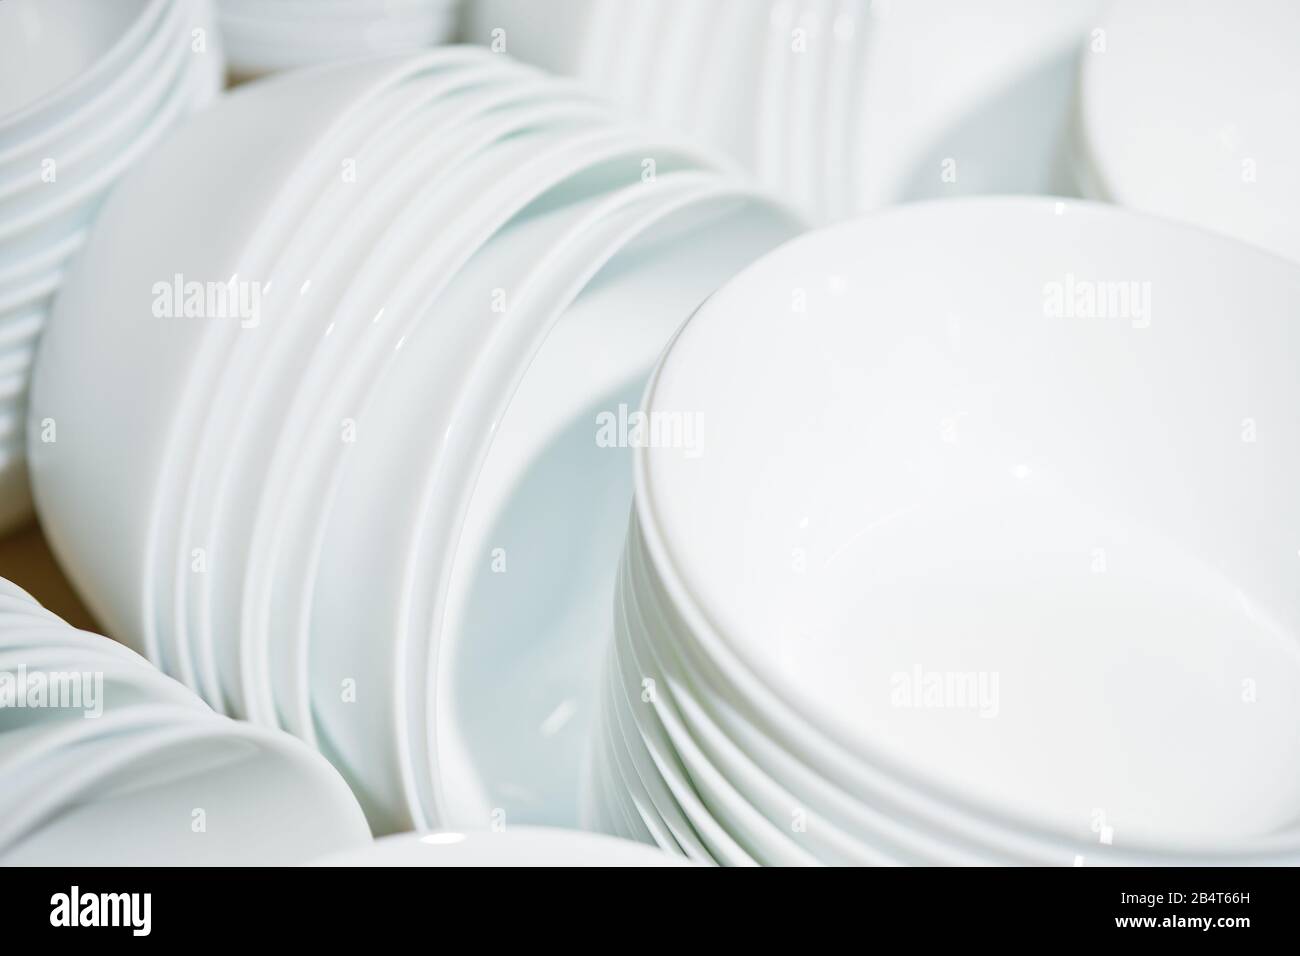 Piles of plates hi-res stock photography and images - Alamy